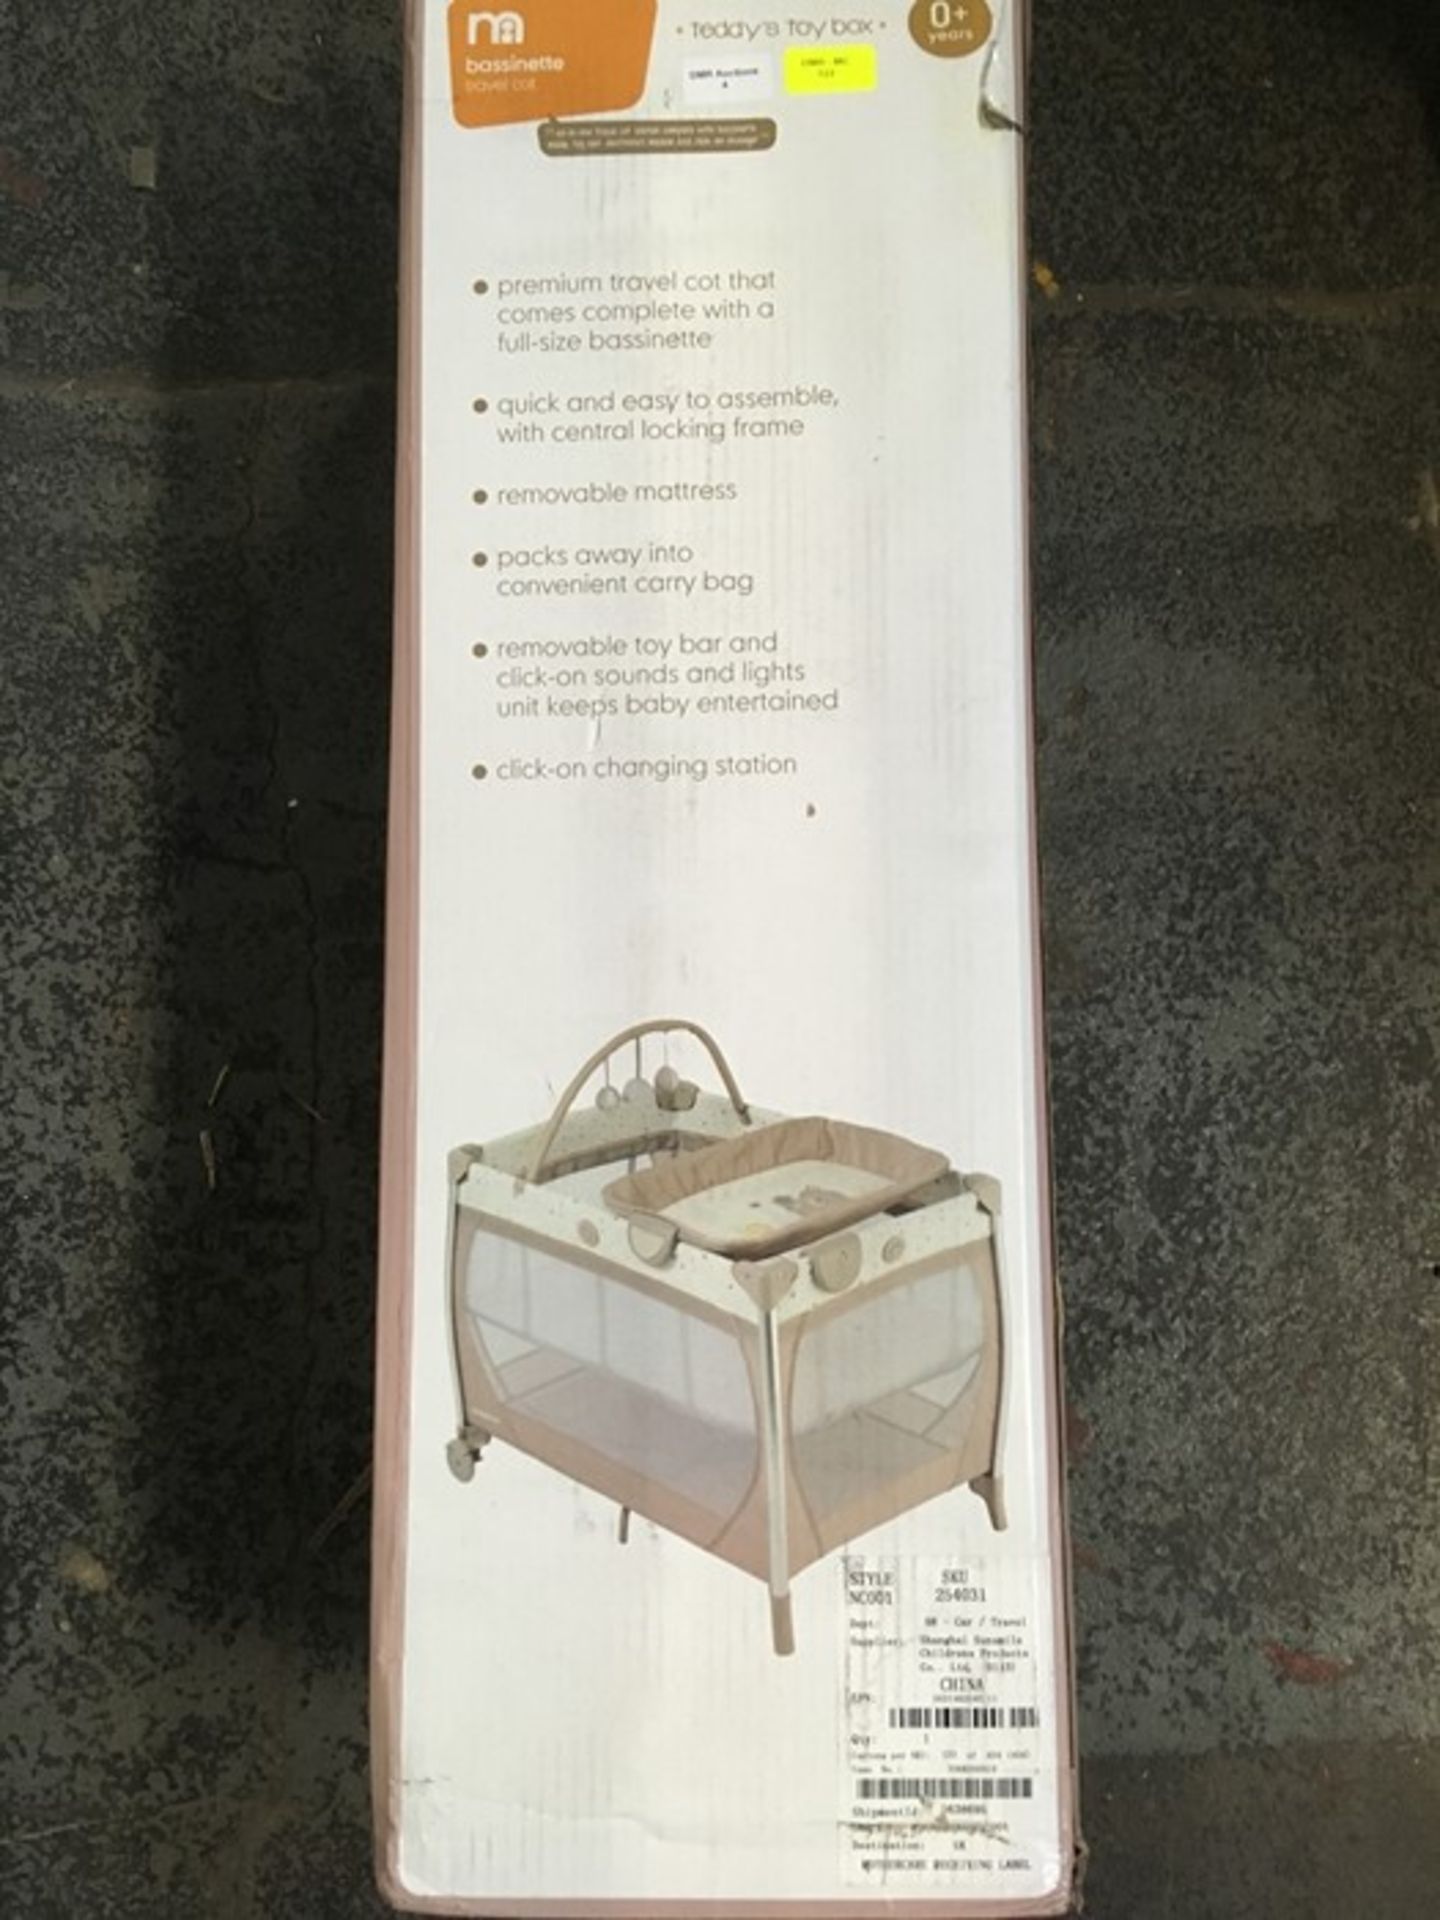 1 BOXED MOTHERCARE BASSINETTE TRAVEL COT - TEDDY'S TOY BOX / RRP £120.00 (PUBLIC VIEWING AVAILABLE)